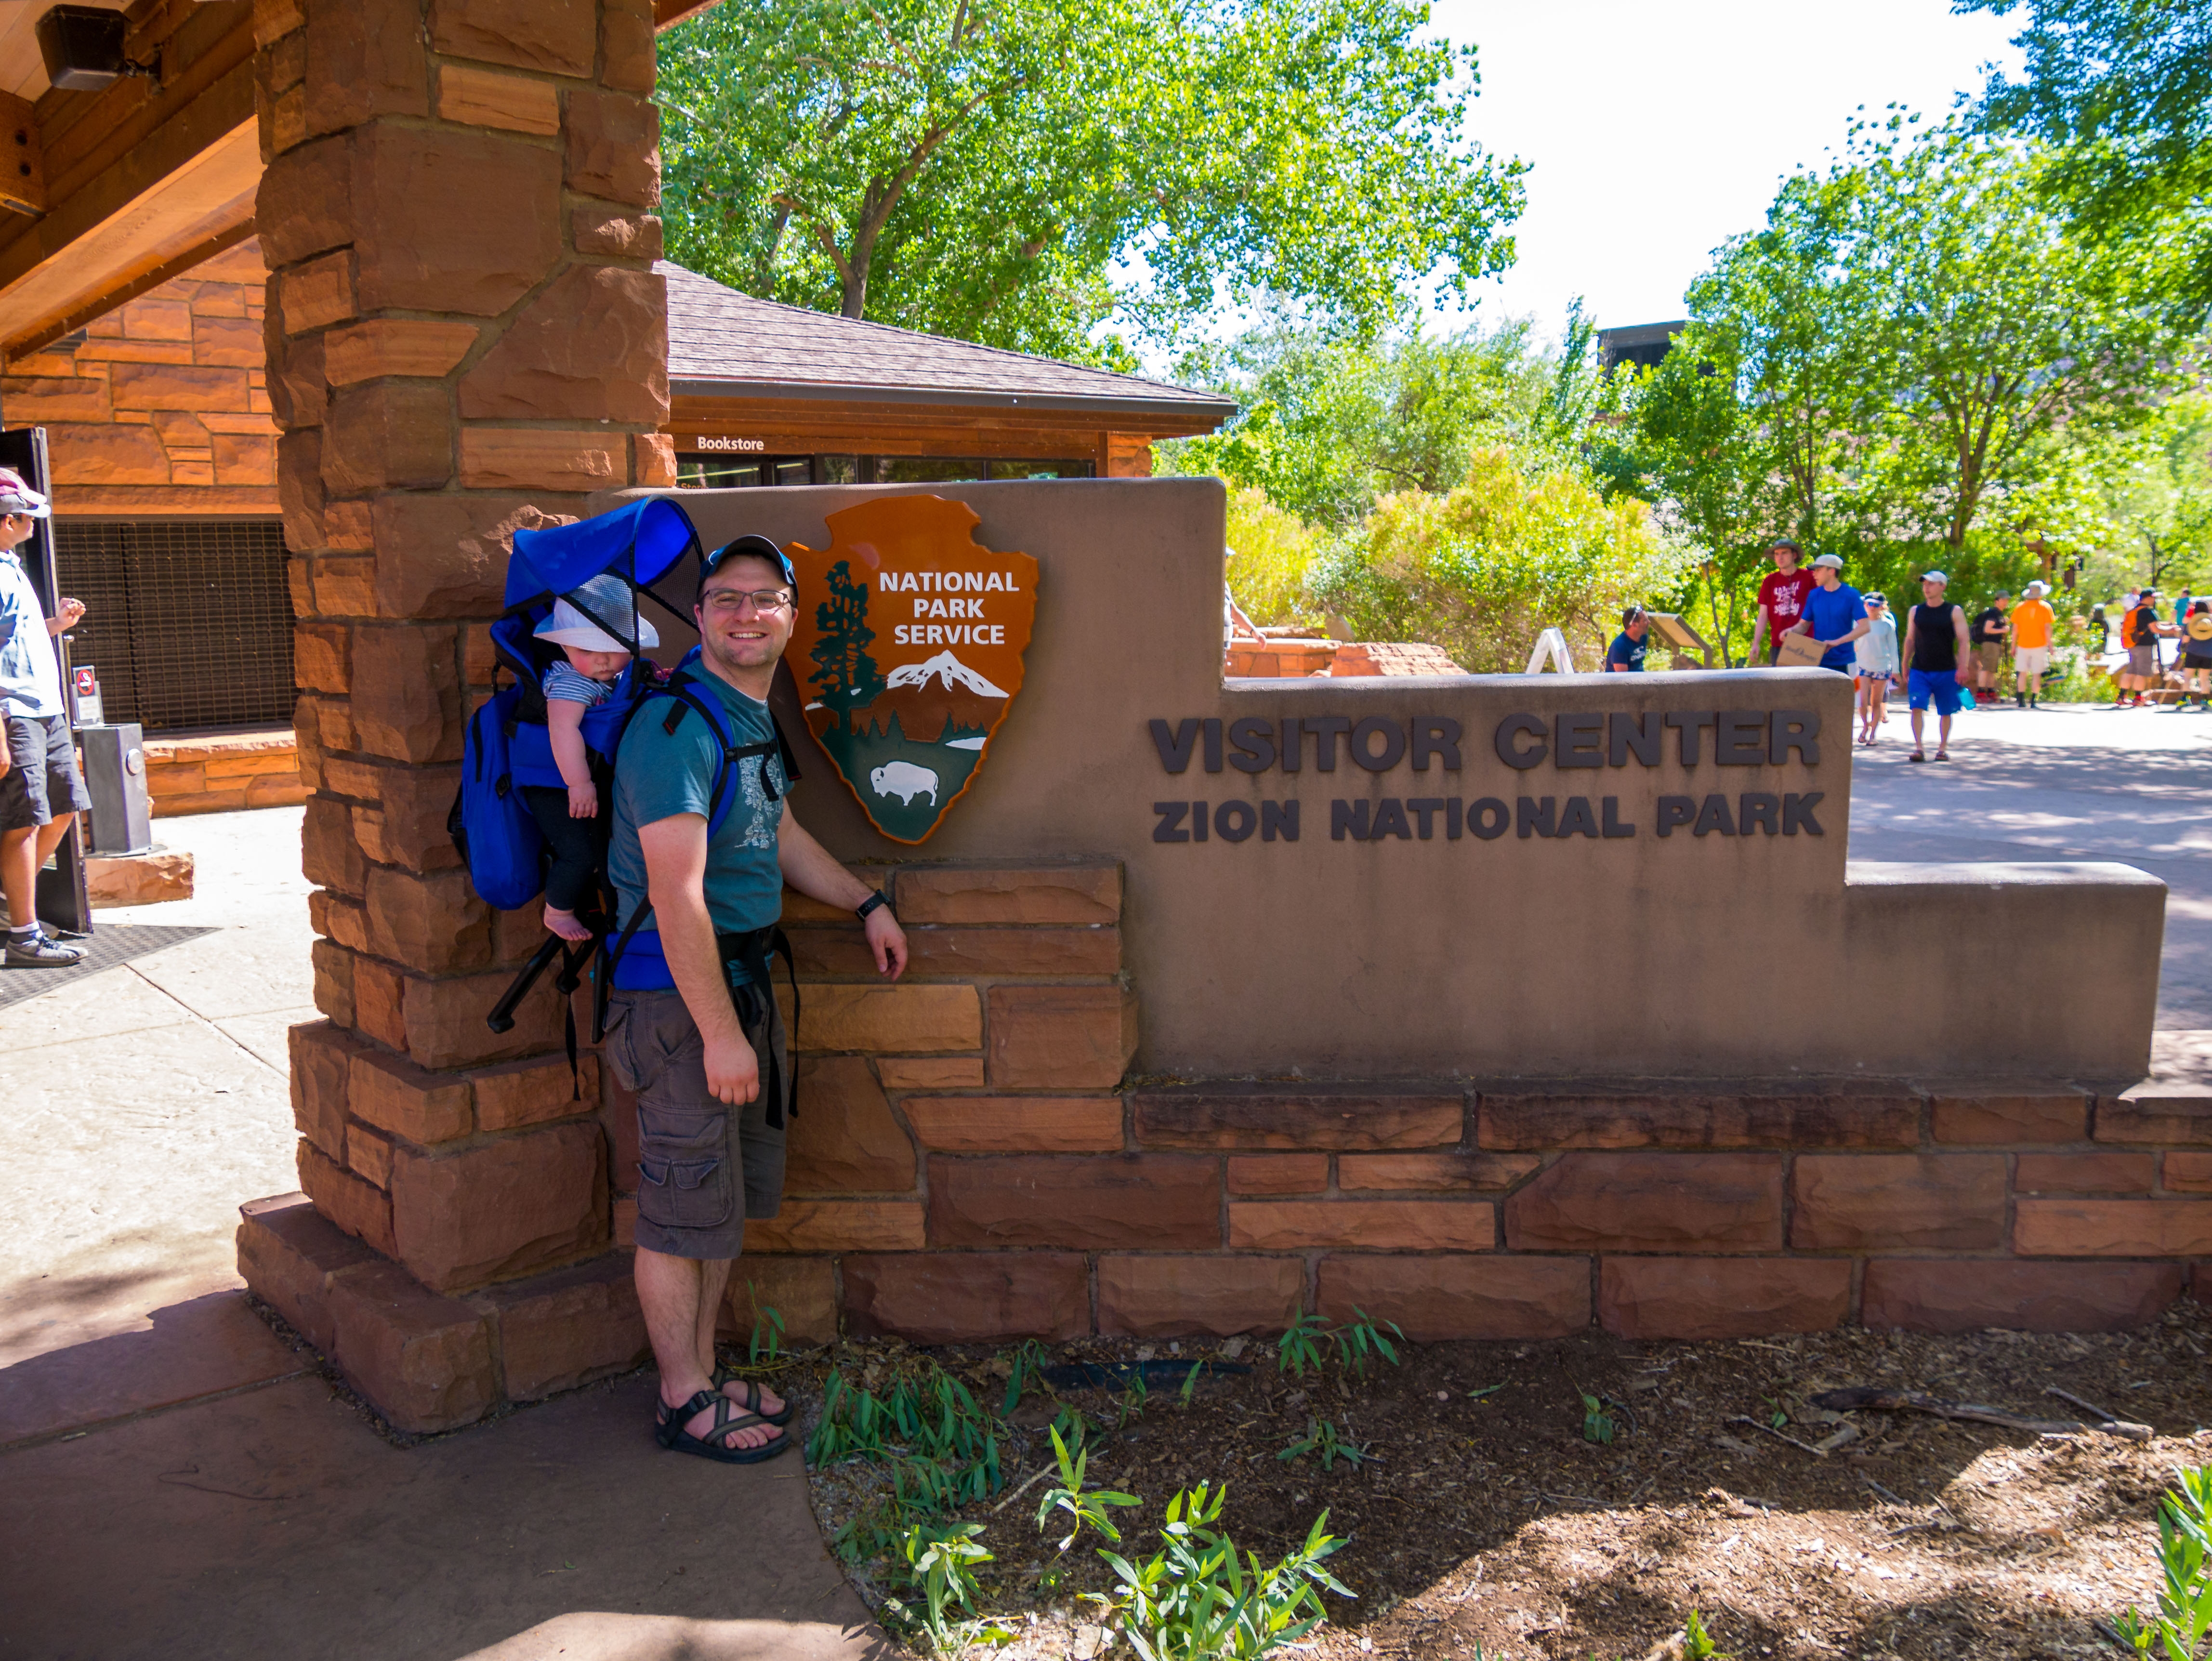 Ben and Lucy at the visitor center sign in Zion National Park